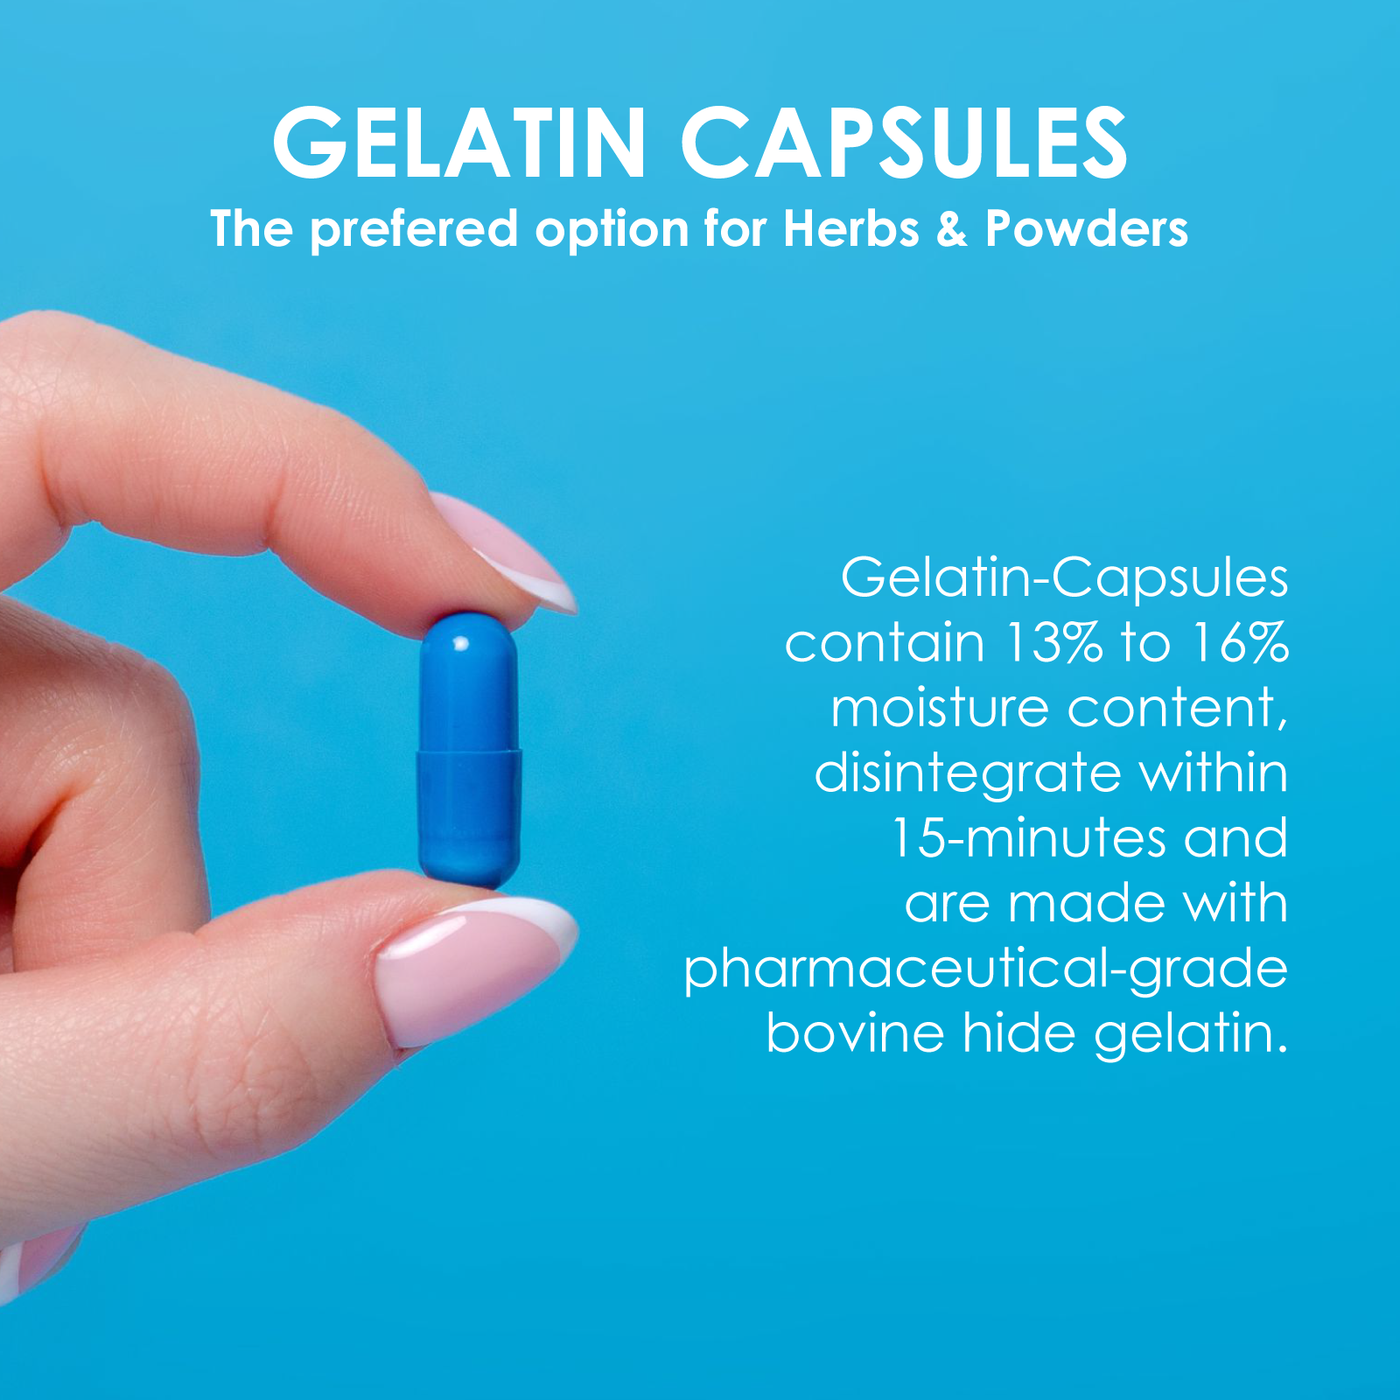 Colored Size 0 Empty Gelatin Capsules by Capsuline - Blue/White